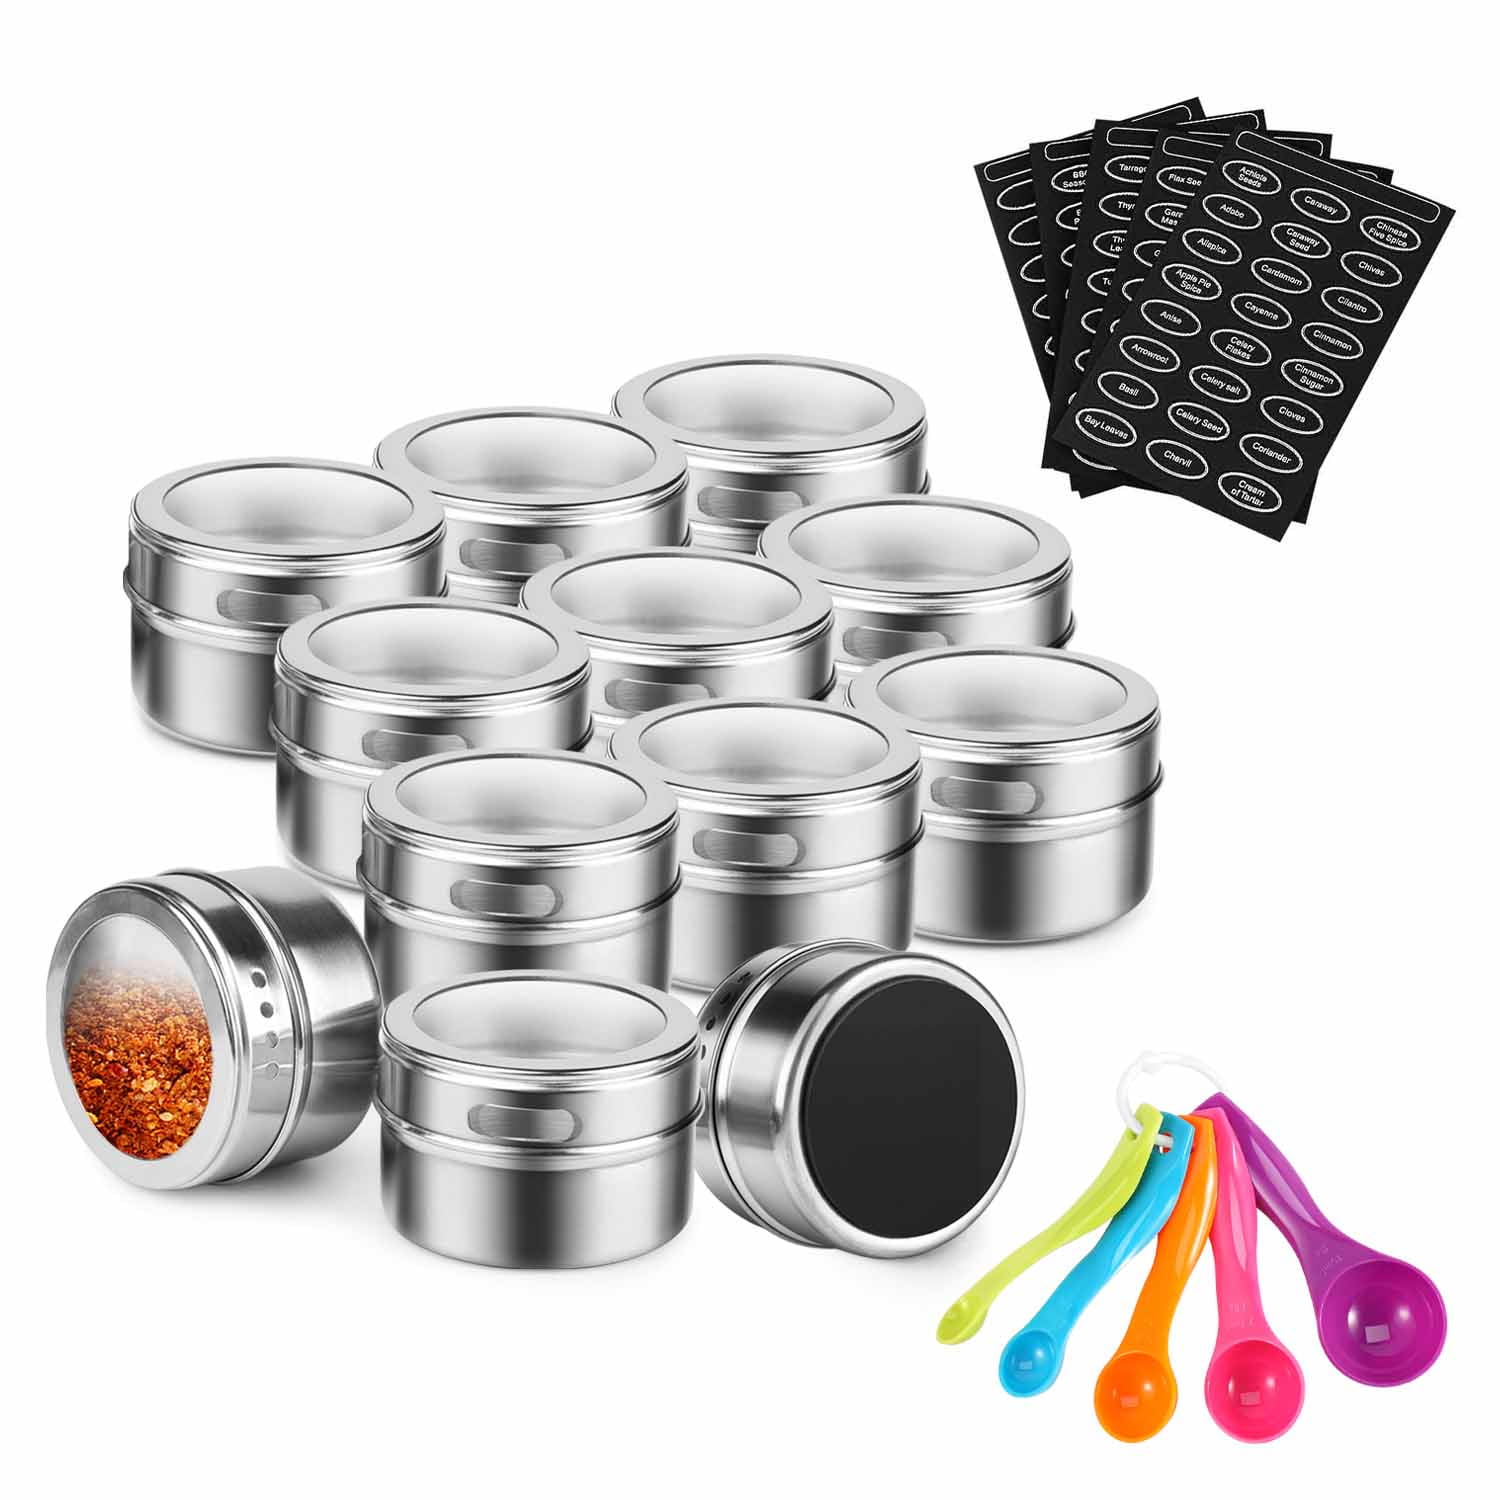 Magnetic Spice Tins, Condiment Food Jars, Seasoning Storage Containers (3oz, 12 Pack) Clear Lids, Sticker & Measuring for Stainless Steel Wall Base, Hanging Rack Organizer - Walmart.com